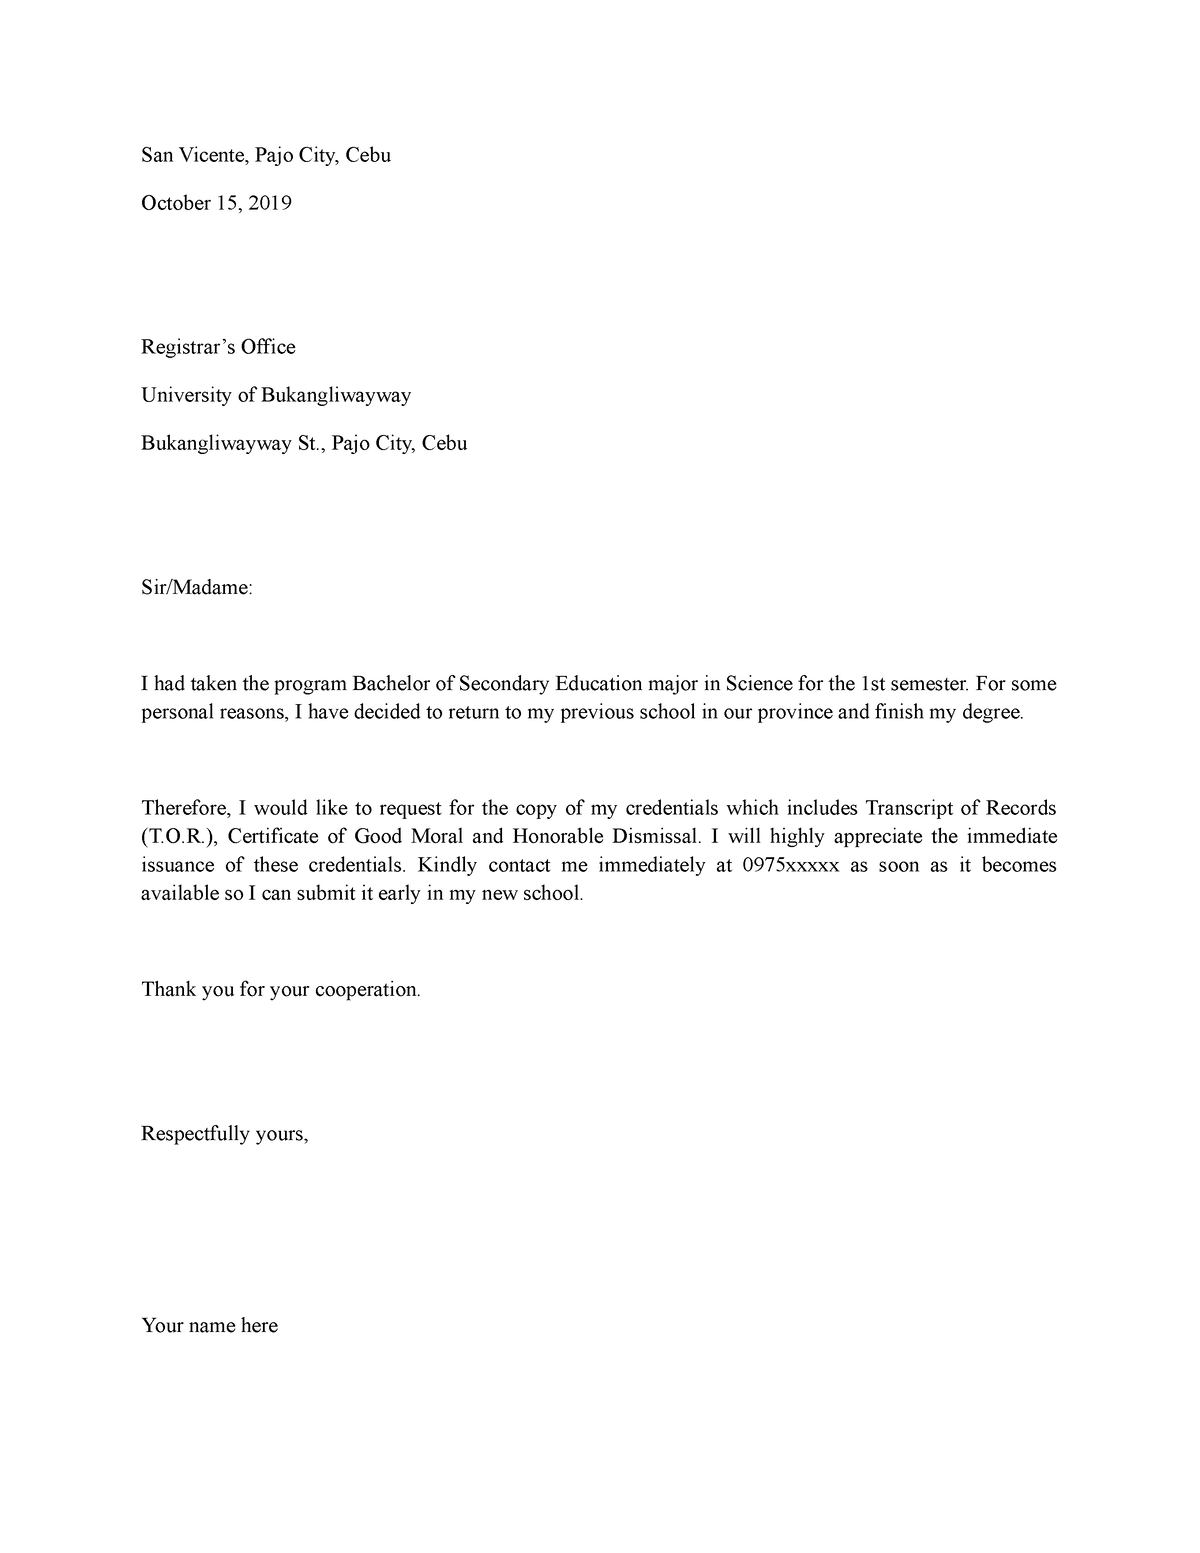 Letter of Request Sample for students and teachers - San Vicente, Pajo ...